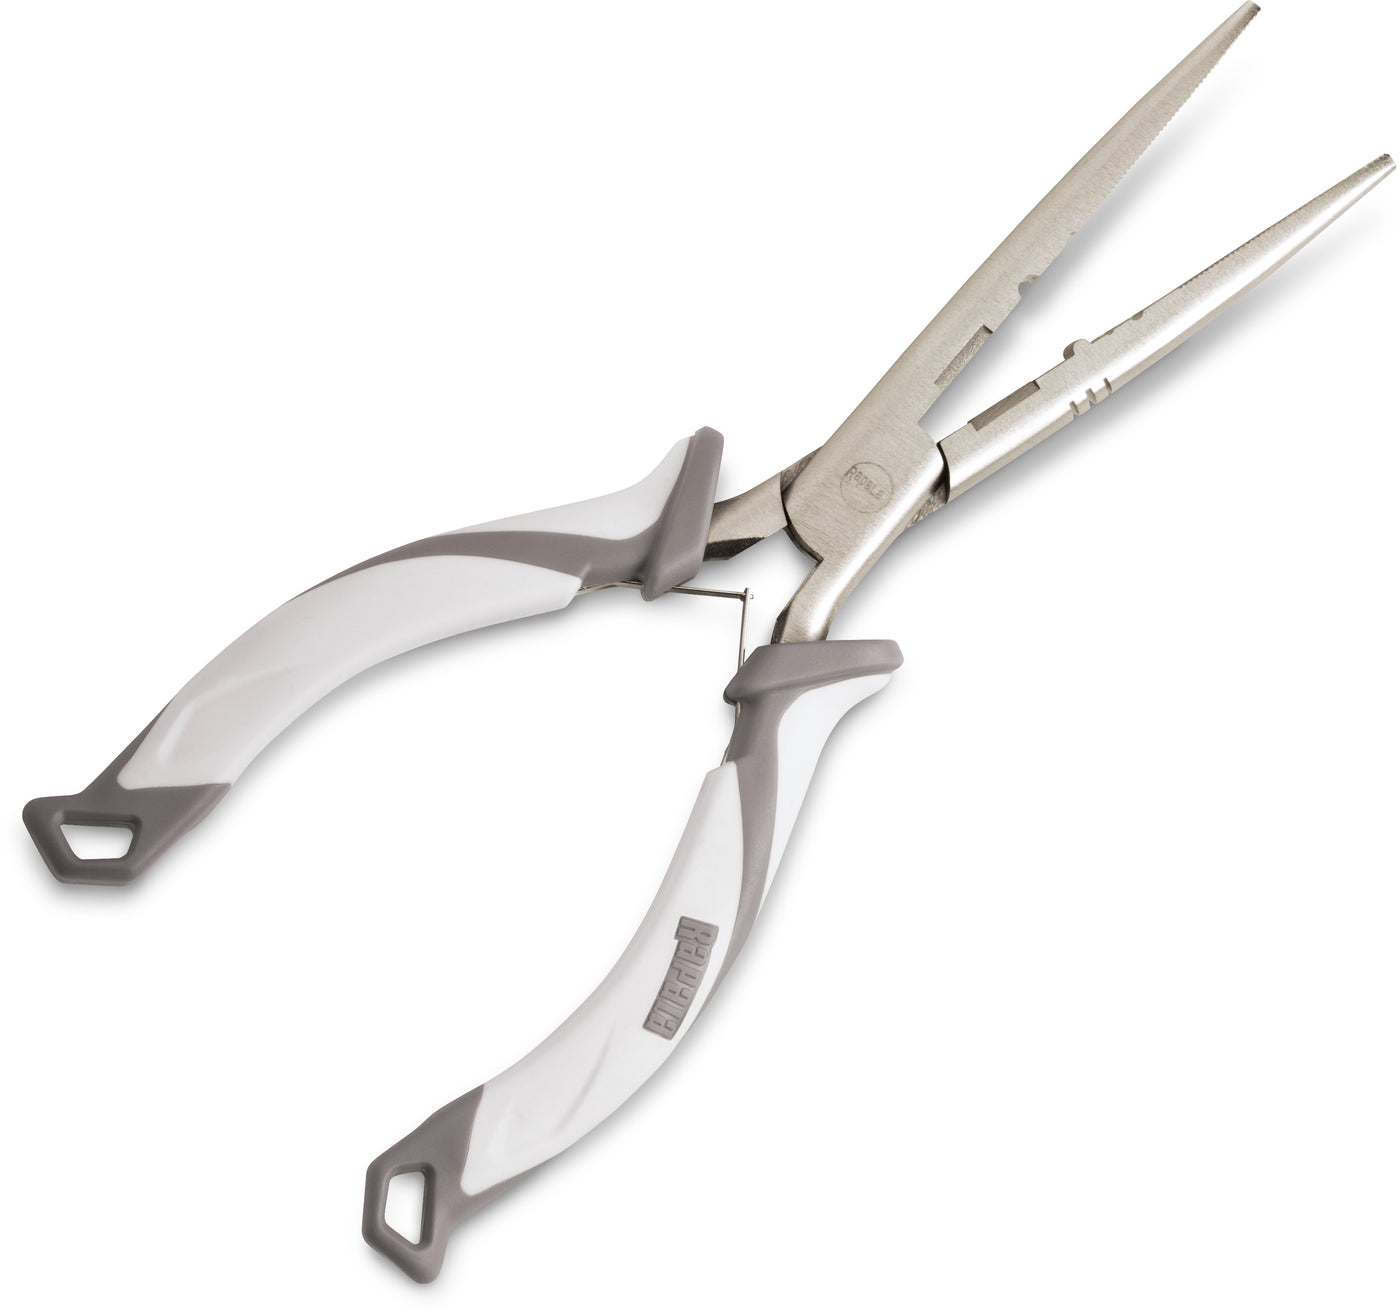 New 8 Fisherman's Pliers, Fishing Needle Nose Pliers - Stainless Steel